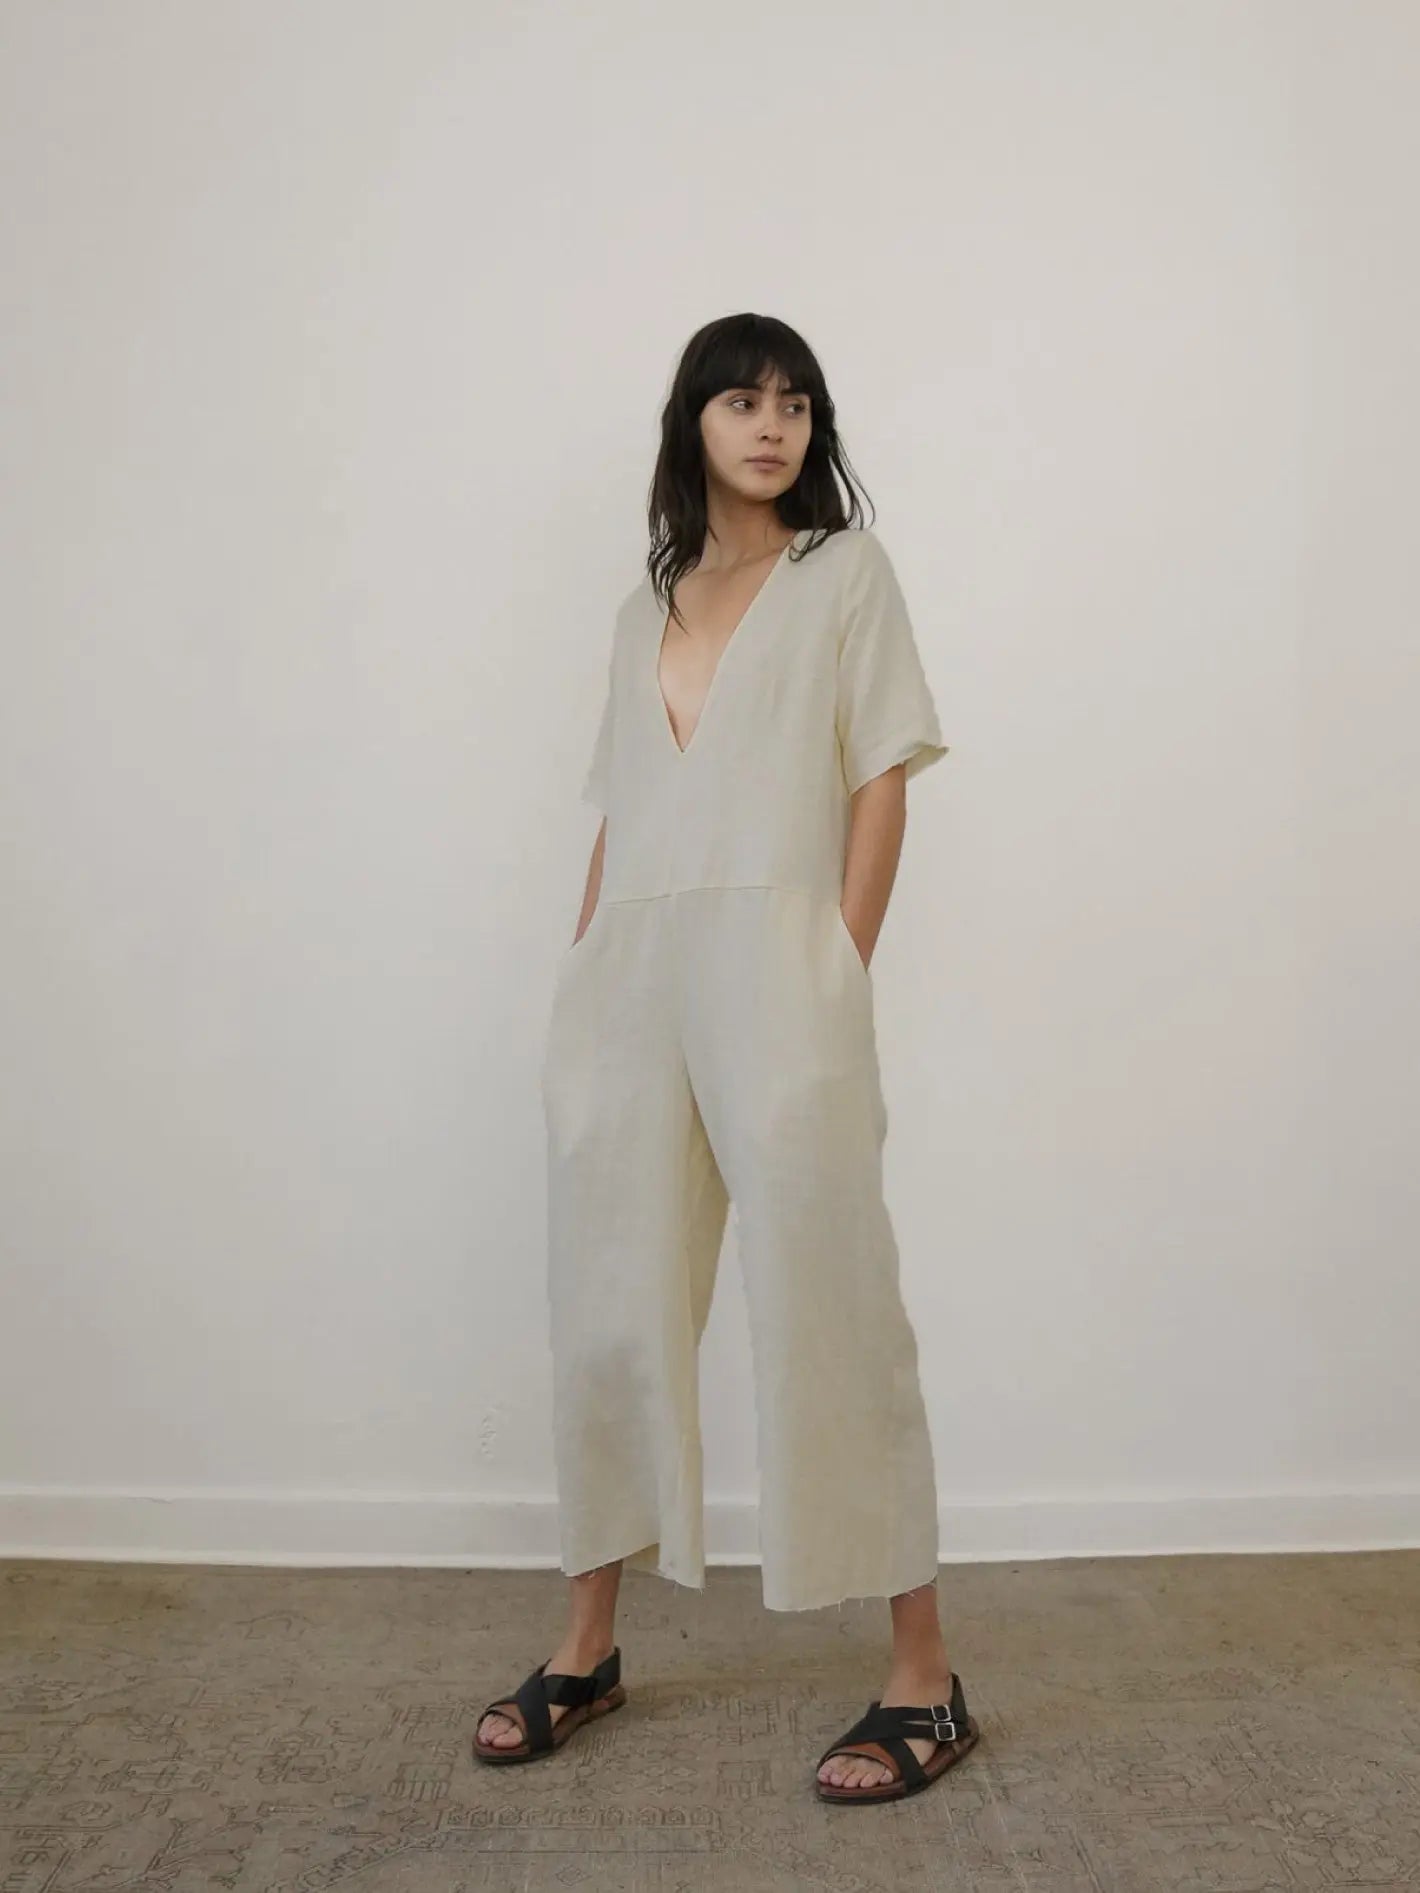 A woman with long dark hair stands facing a plain white wall, inside what appears to be a well-lit store in Barcelona. She is wearing the June Jumpsuit Beige by Zii Ropa and black sandals. The floor is light brown, possibly carpeted.